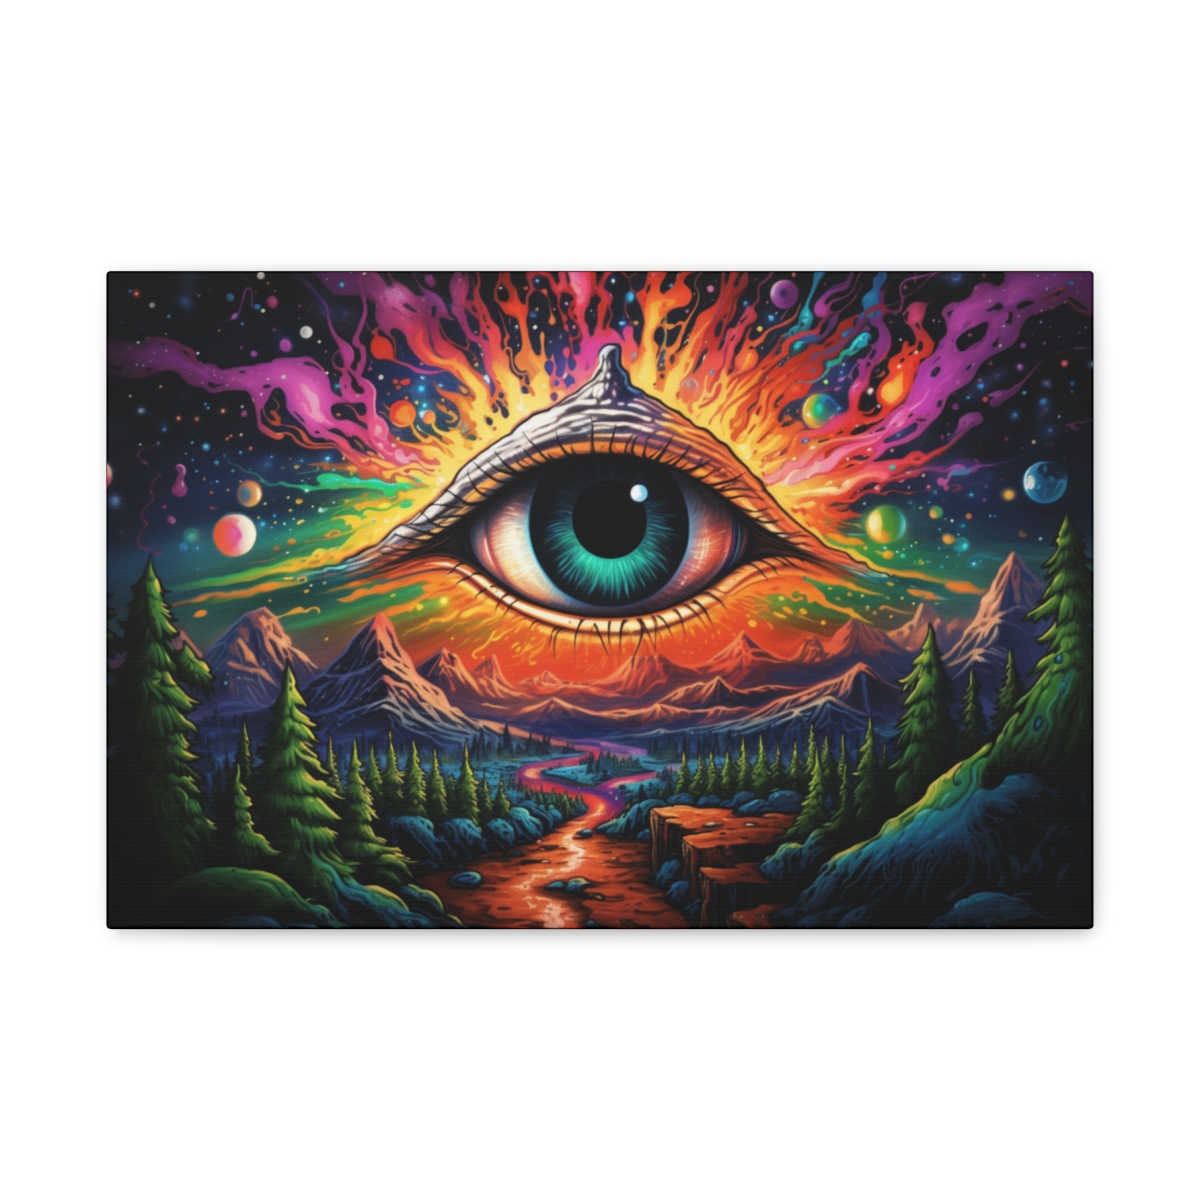 Psychedelic Hippie Art Canvas Print: The Gaze From Prehistory